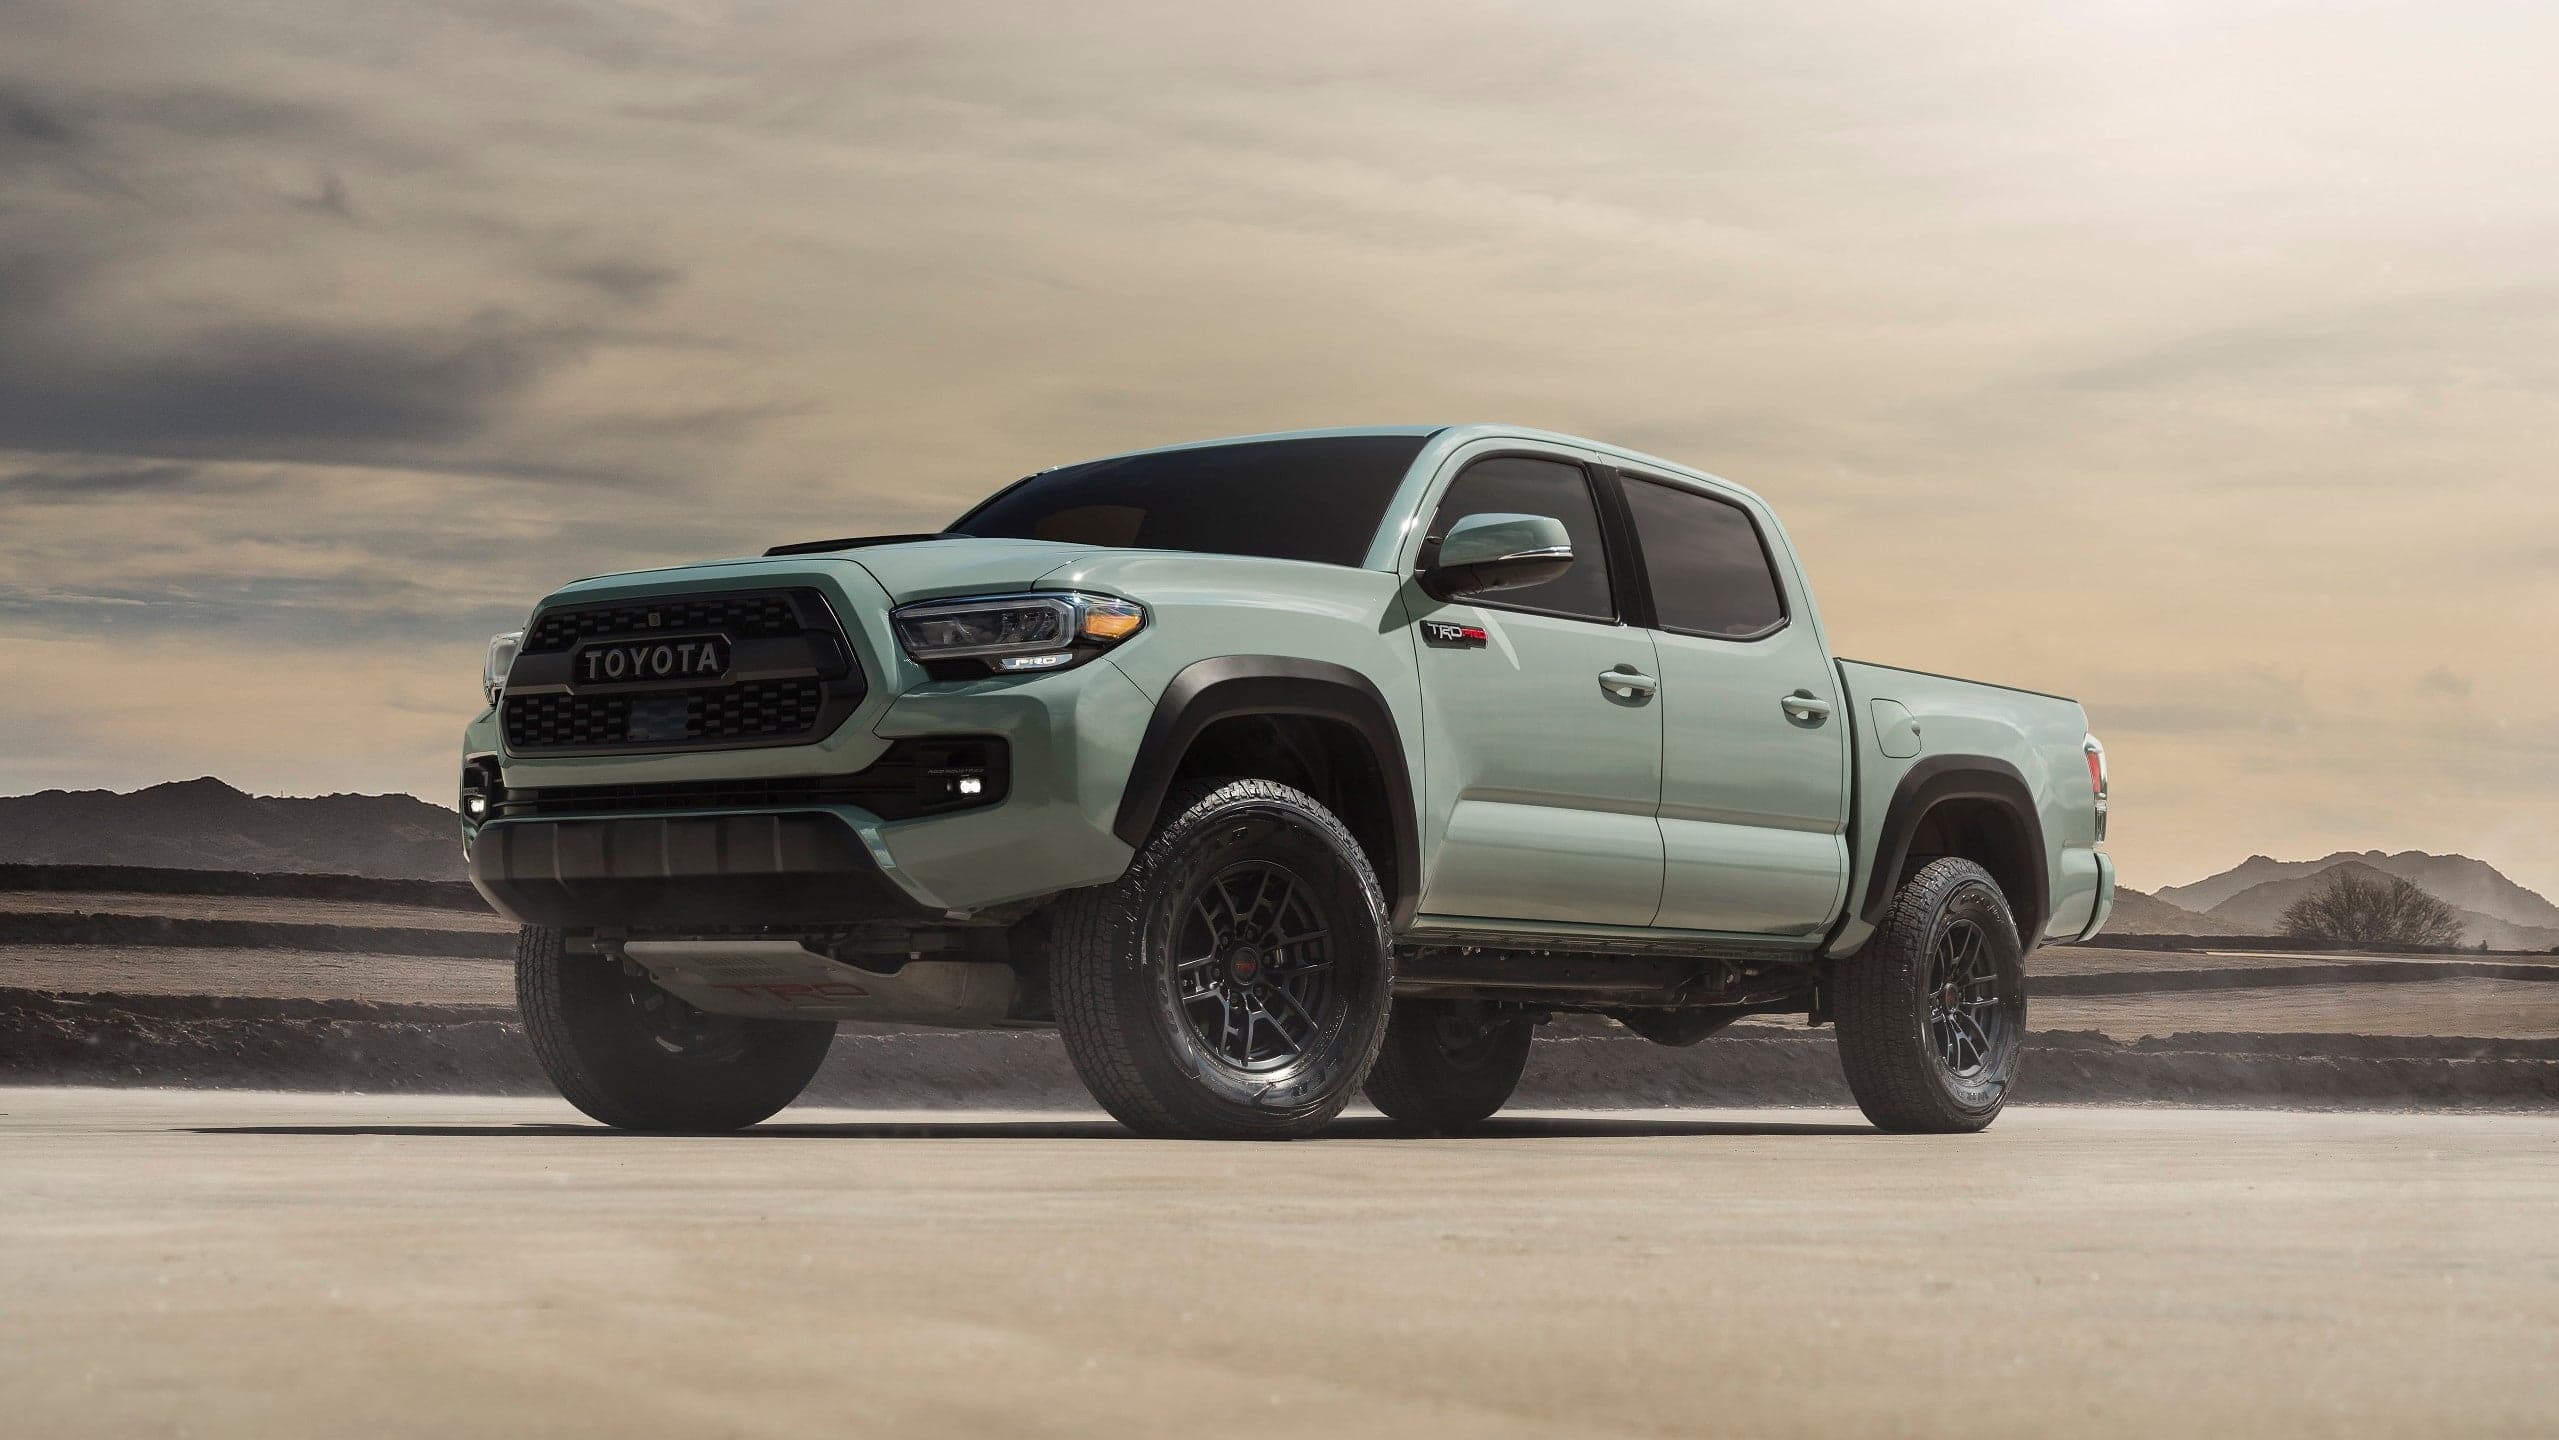 The Cheapest 2021 Toyota Tacoma Will Cost $27,325